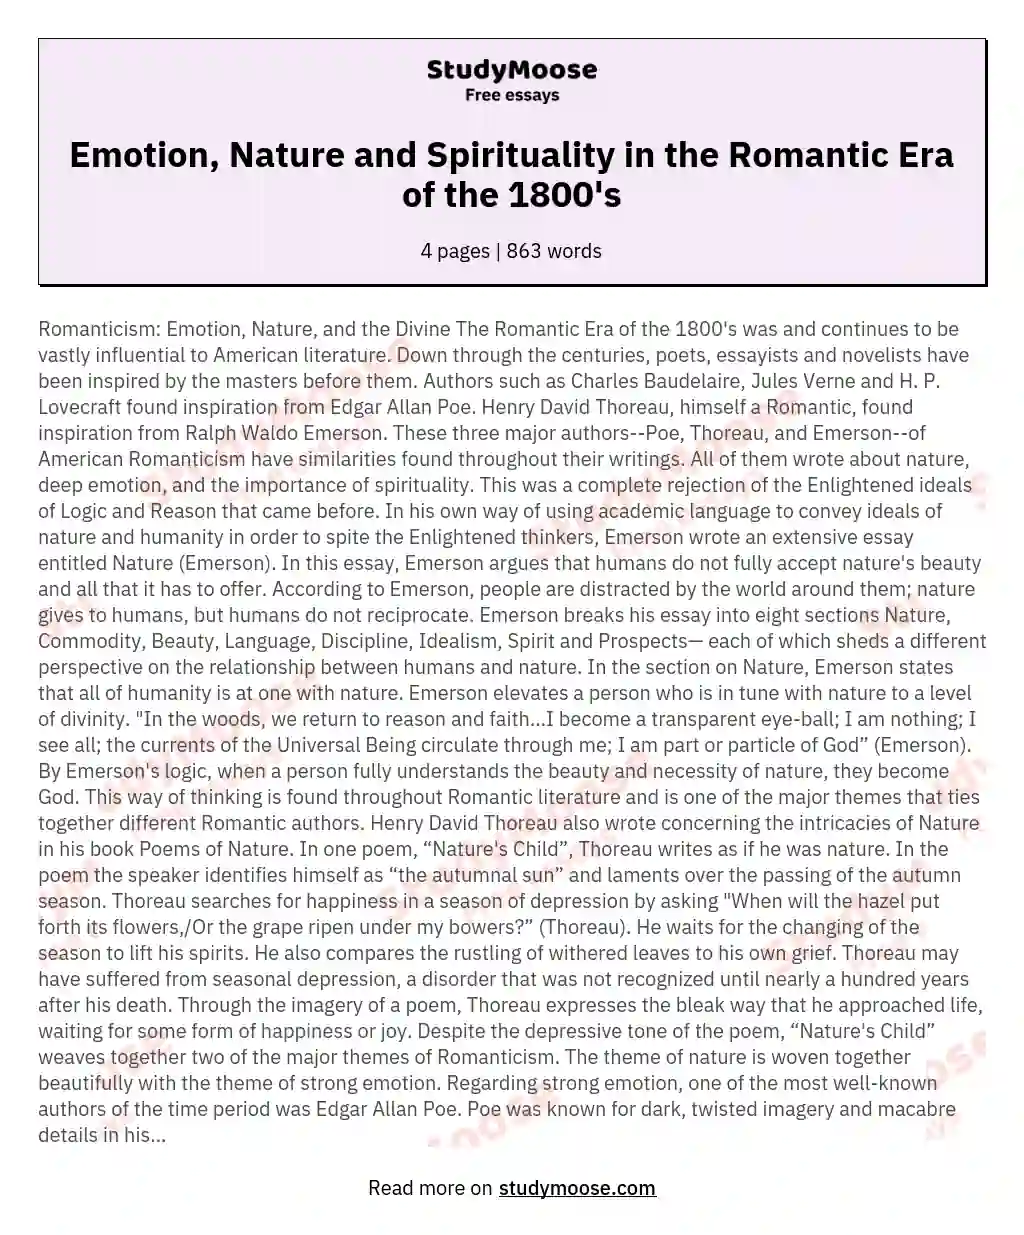 Emotion, Nature and Spirituality in the Romantic Era of the 1800's essay